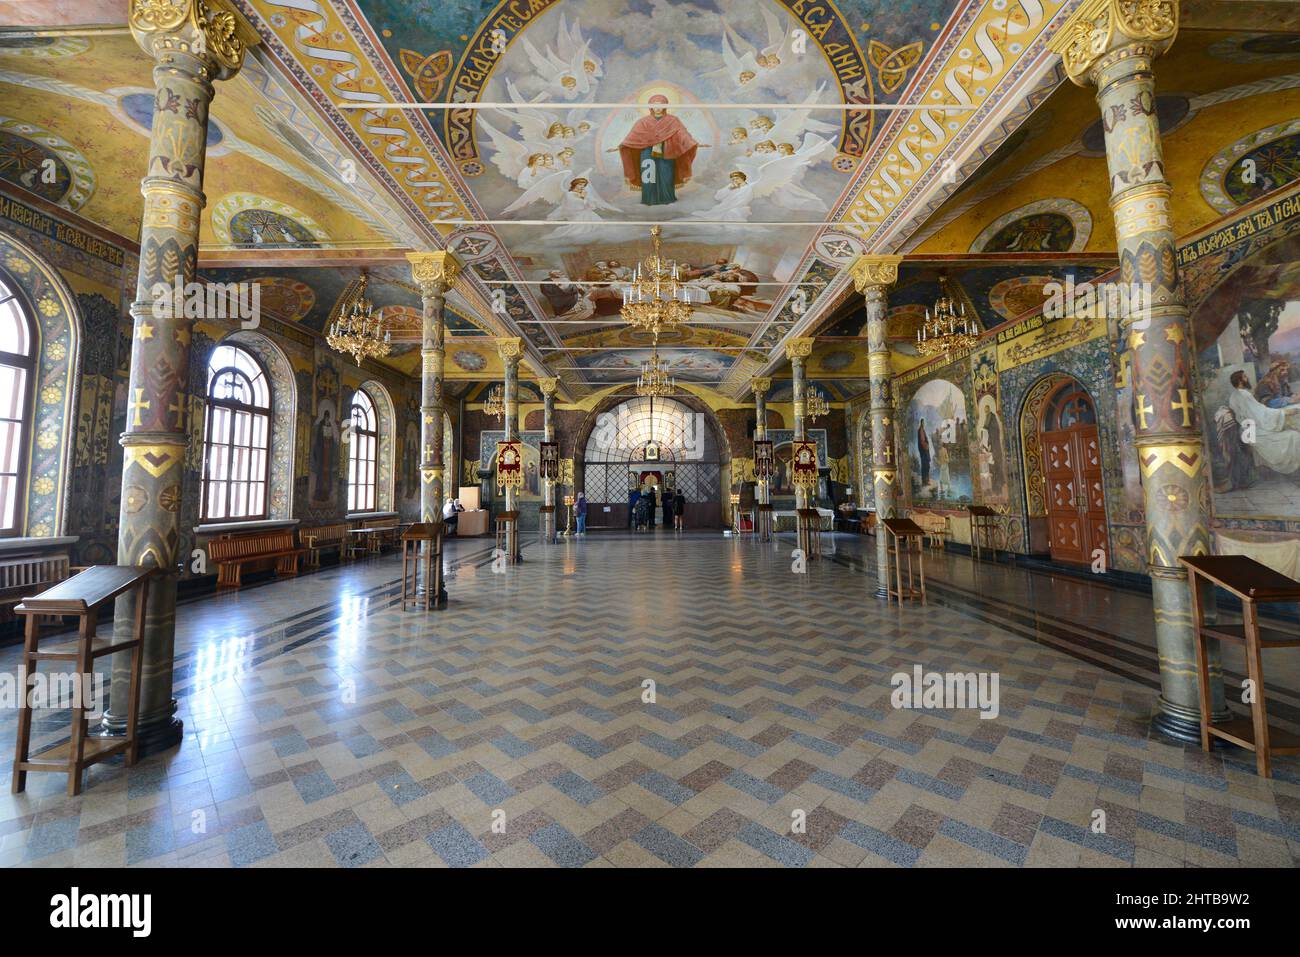 Interior of the Trapezna (Refectory) Church of Anthony and Theodosius of Ukrainian Orthodox Church at the Lavra monstery complex in Kyiv, Ukraine. Stock Photo